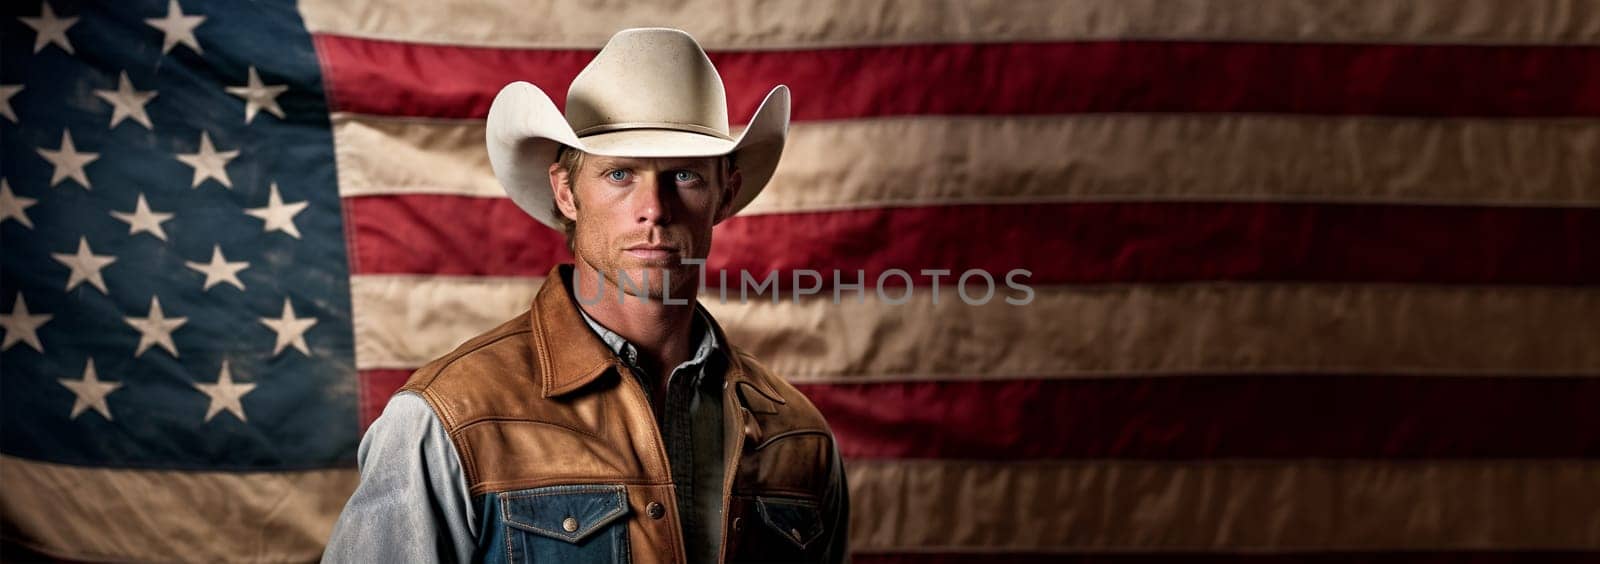 Texas Cowboy male portrait standing by American flag background with copy space. Proud western US United states of America citizen Space for text